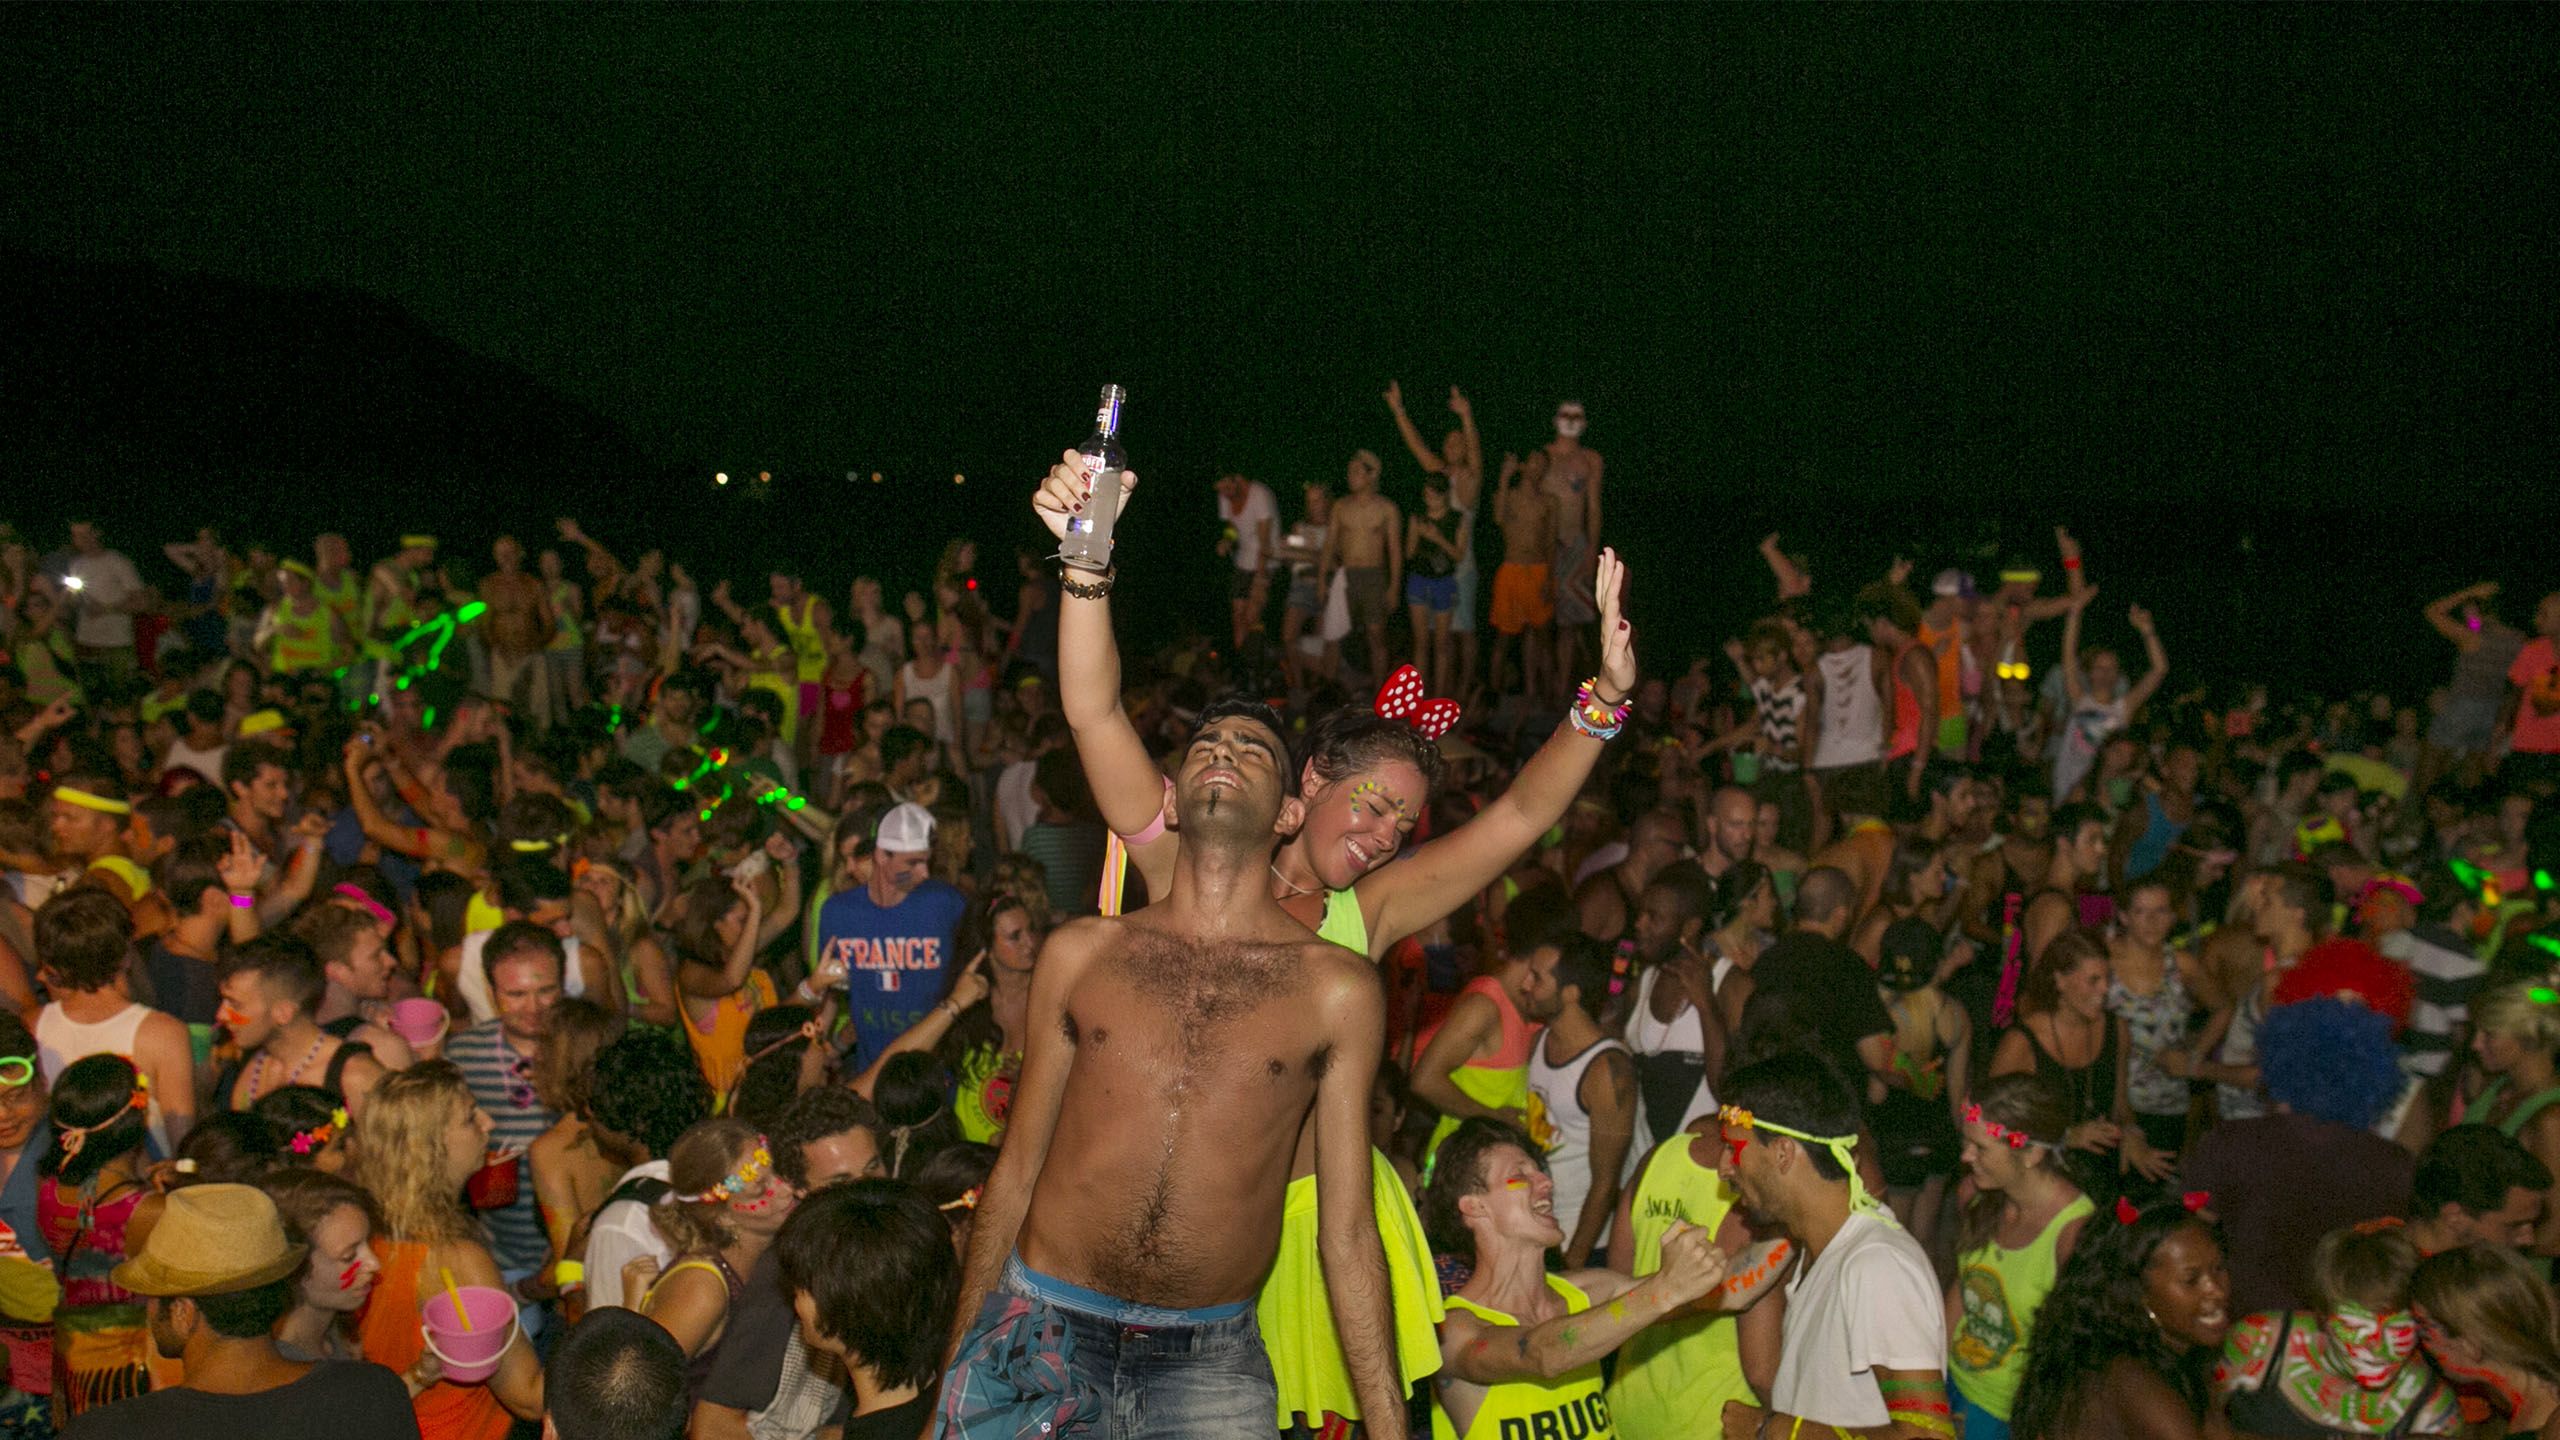 The death of the Full Moon Party